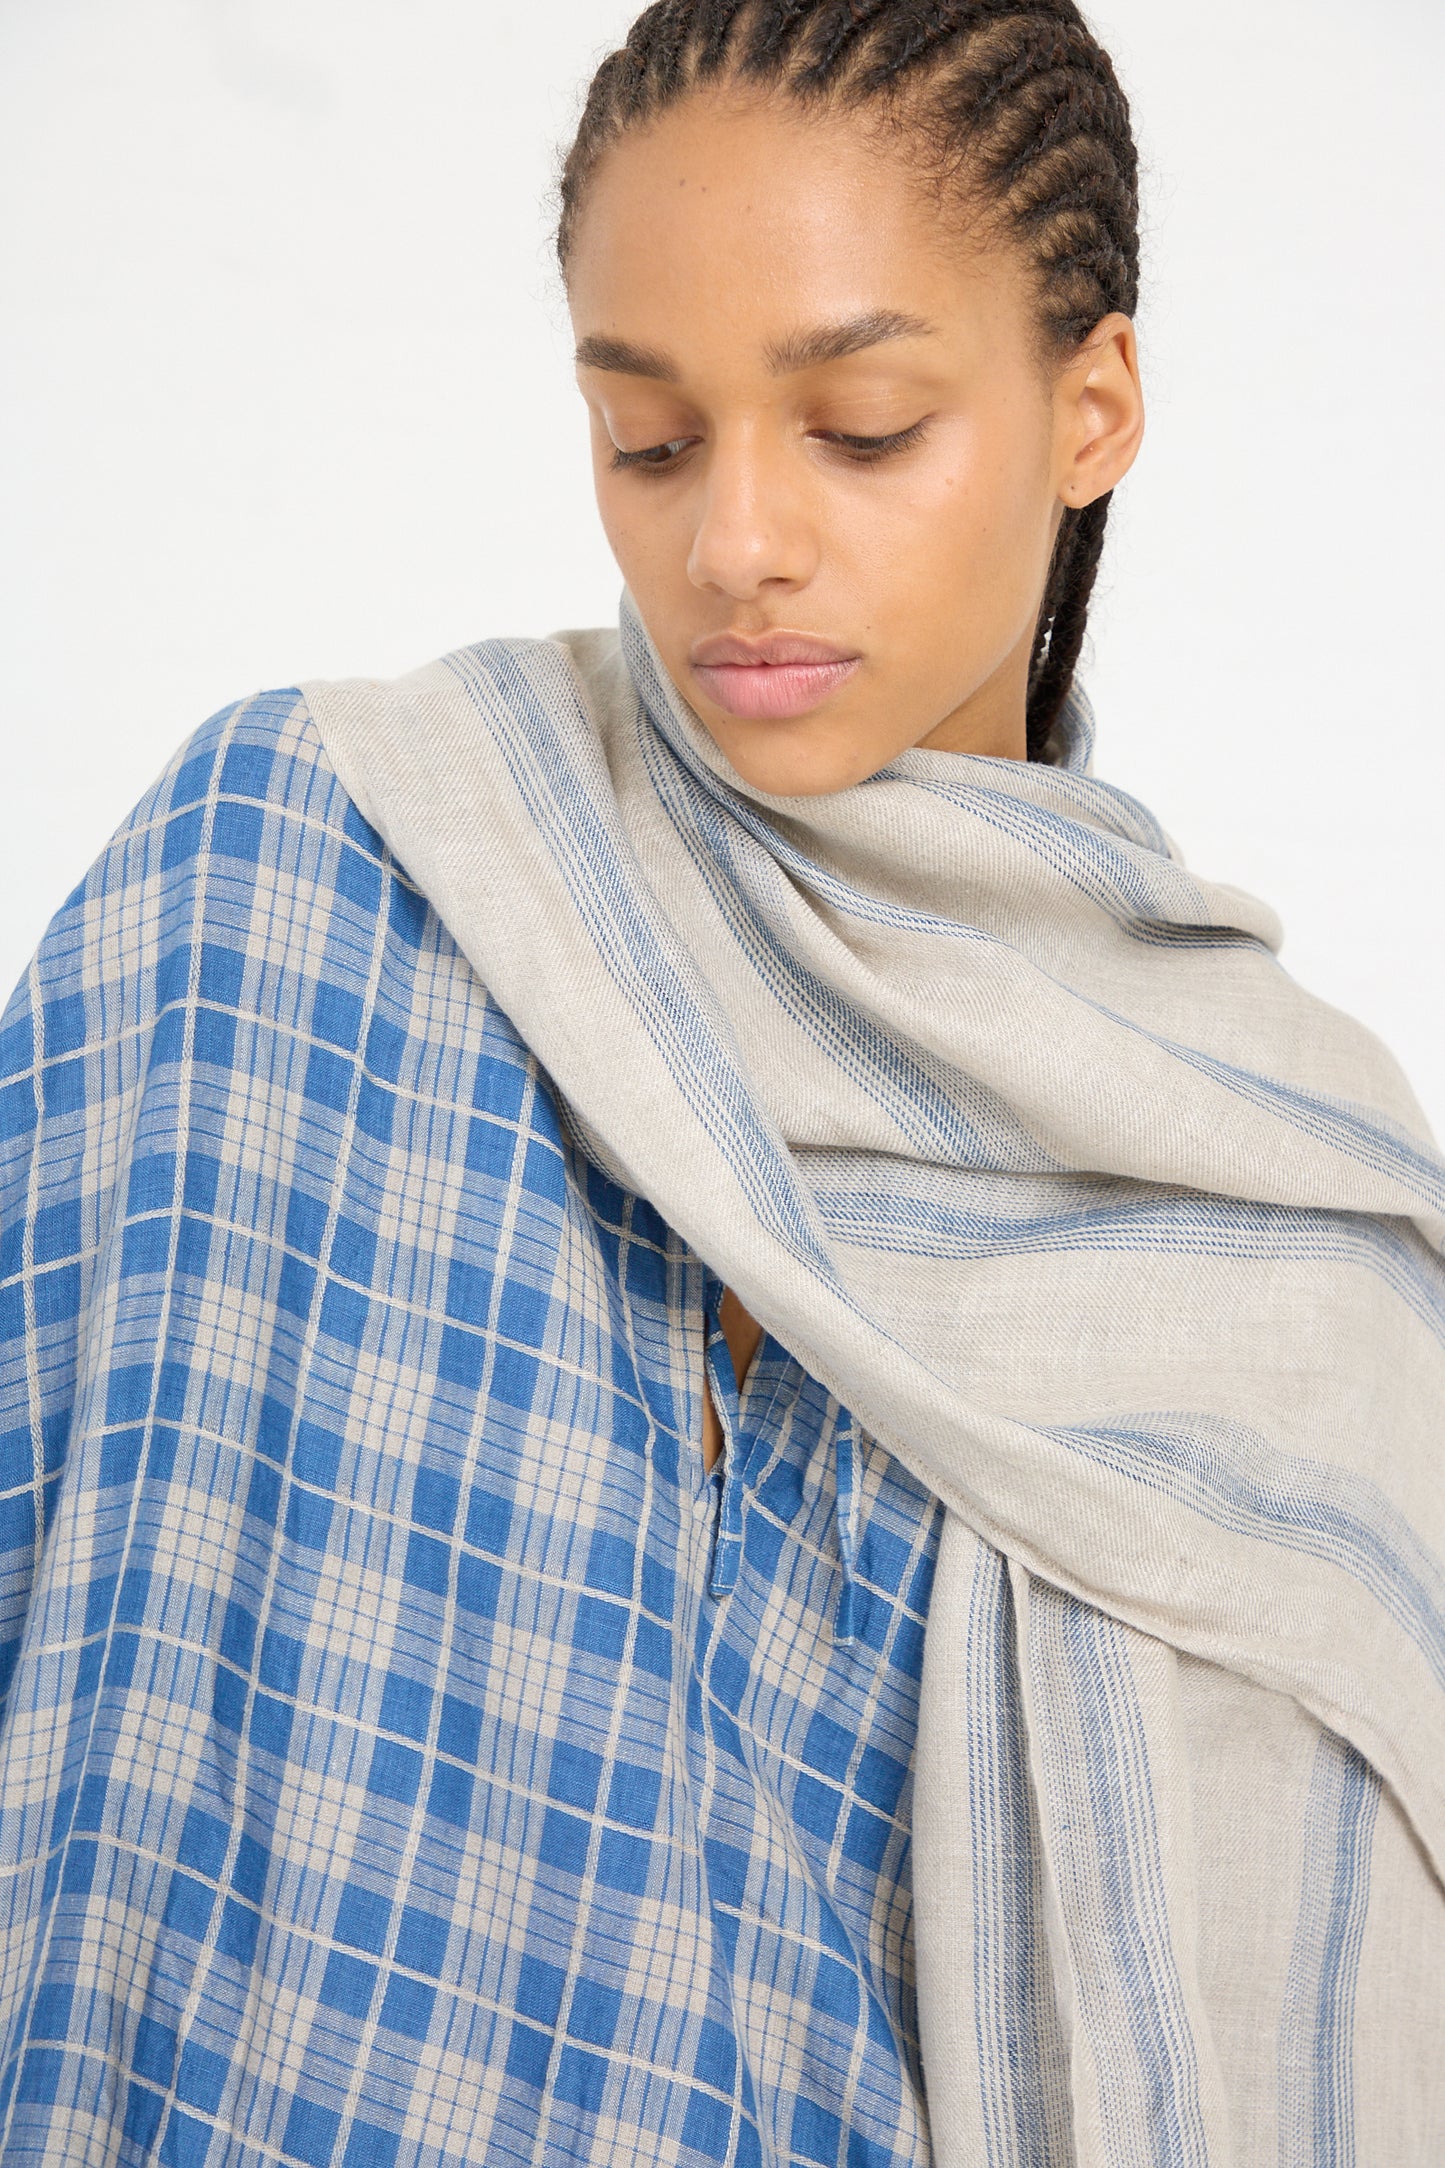 Woman with an Ichi Antiquités Linen Stripe Stole in Natural and Indigo draped over her shoulder.